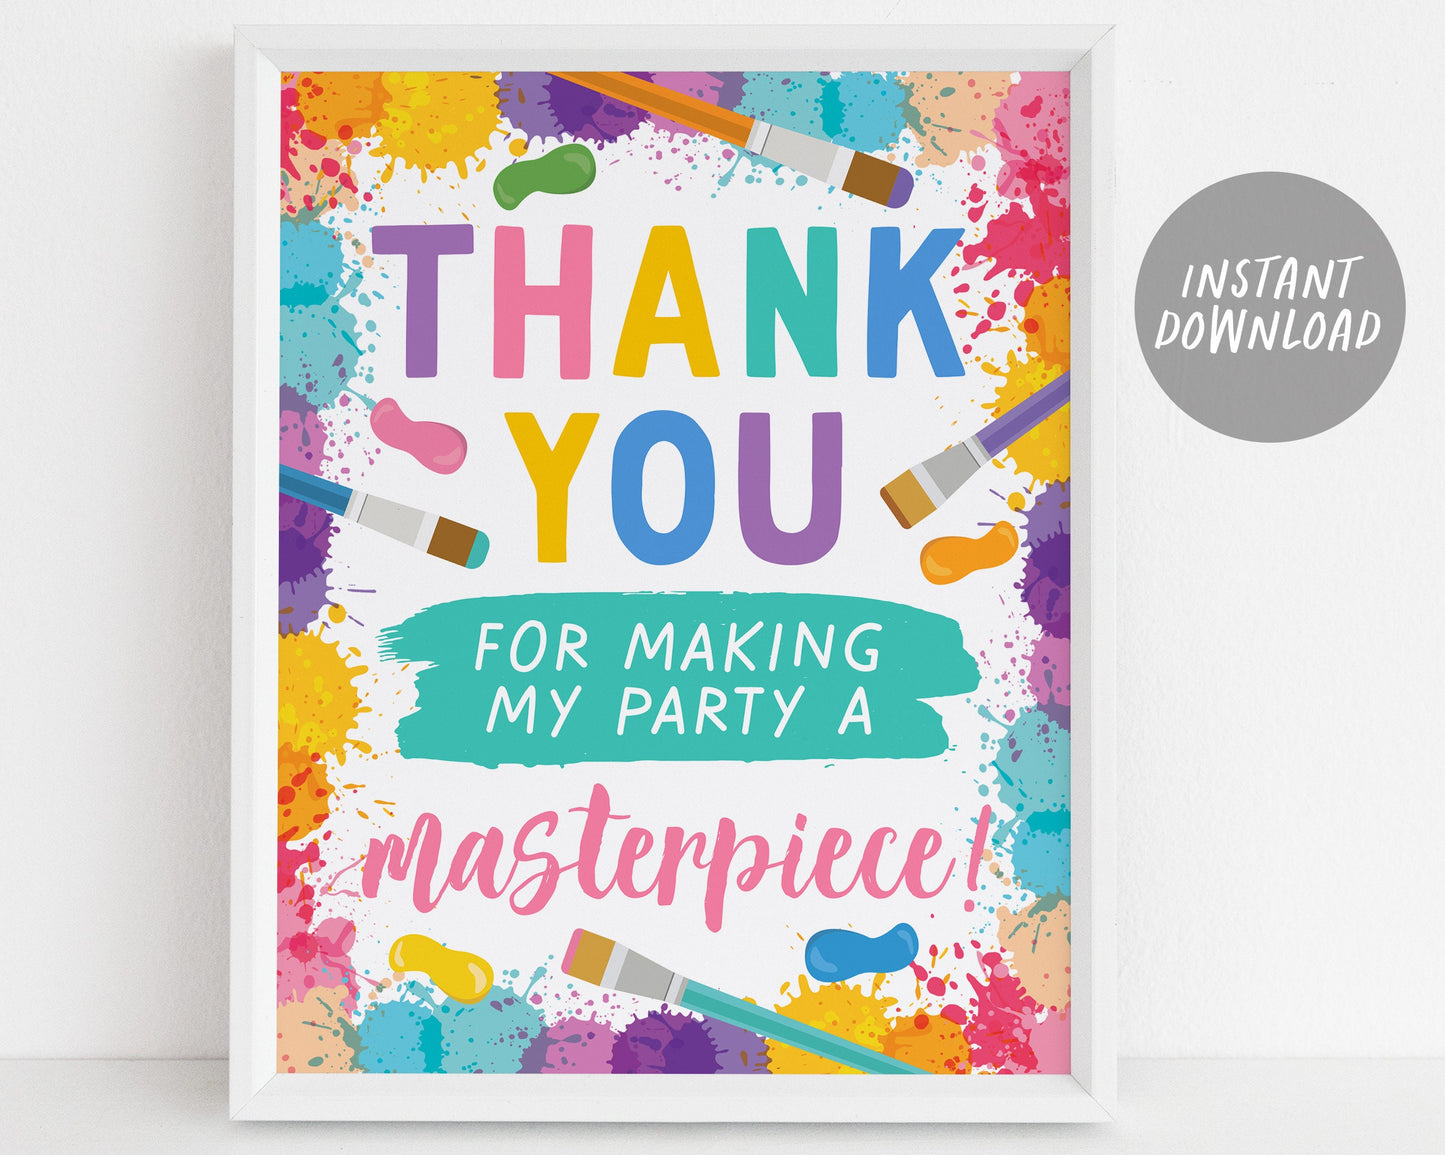 Art Party Signs BUNDLE For Birthday, Painting Themed Girl Party Signage Table, Art Studio Paint Craft Artist Decor Poster Instant Download